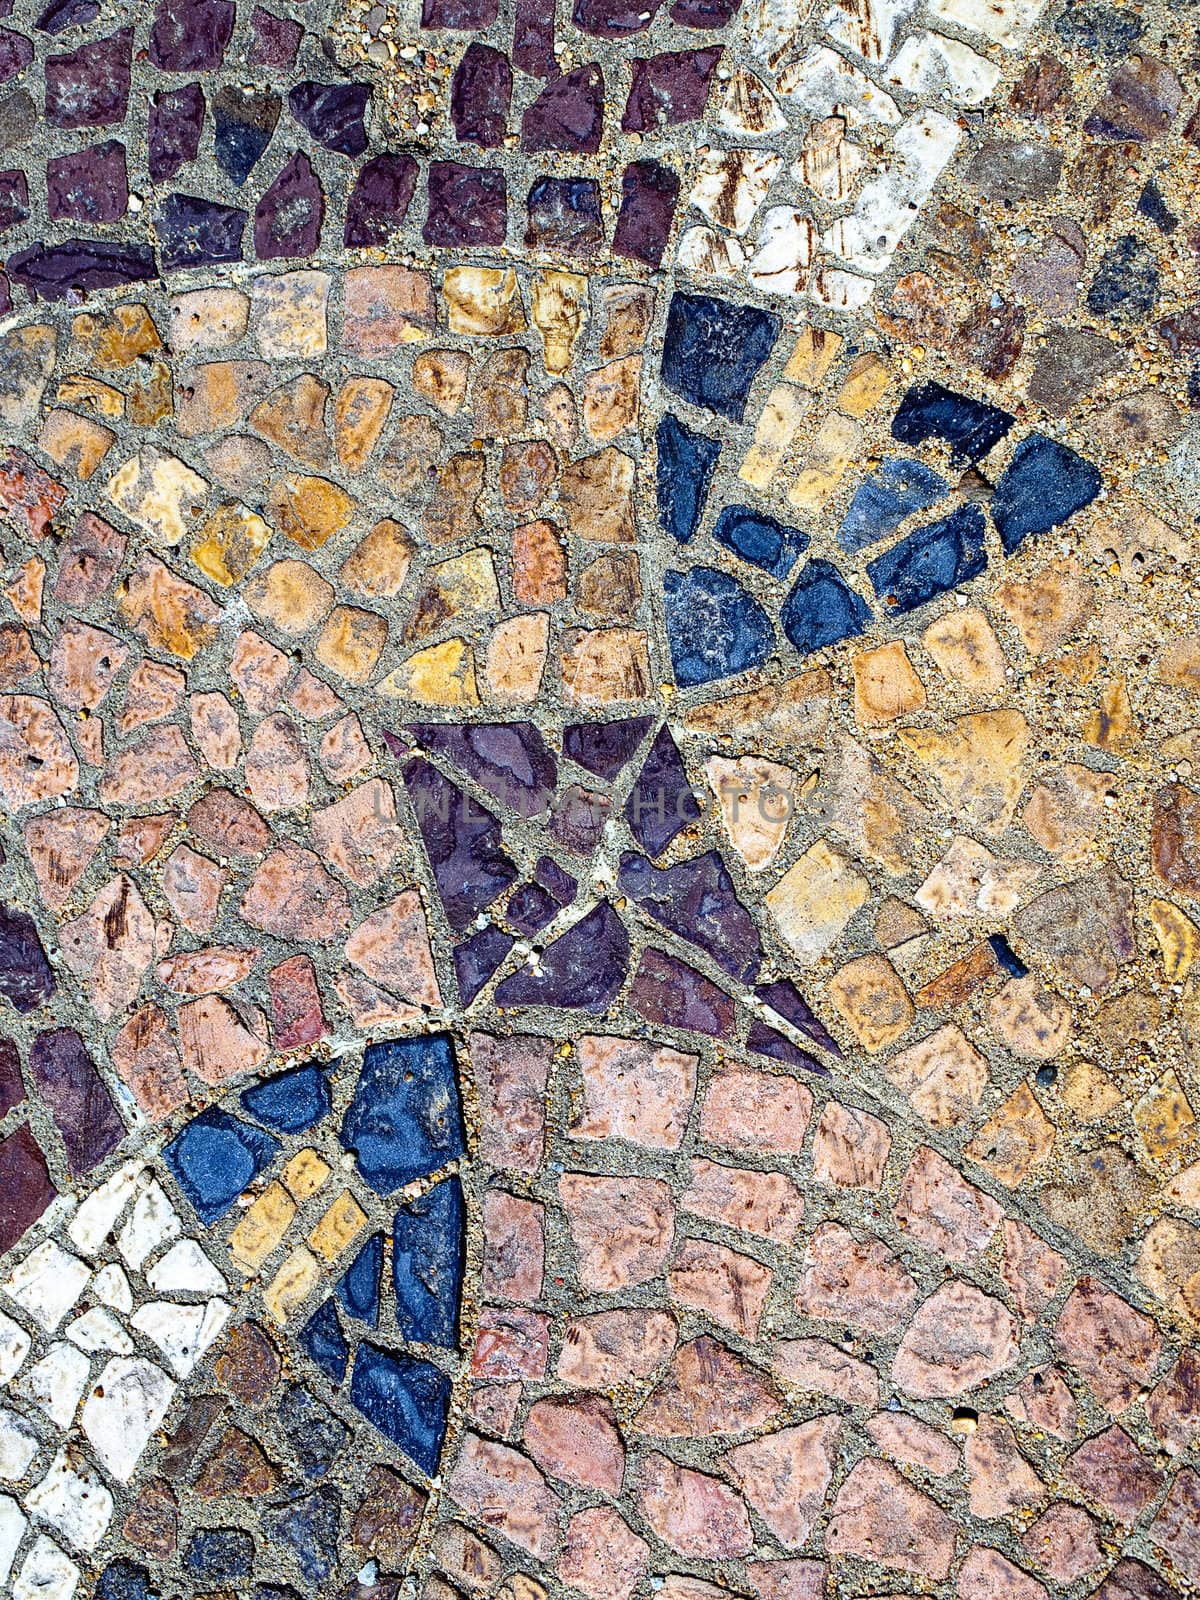 Abstract form, texture and color created with broken tile in cement.